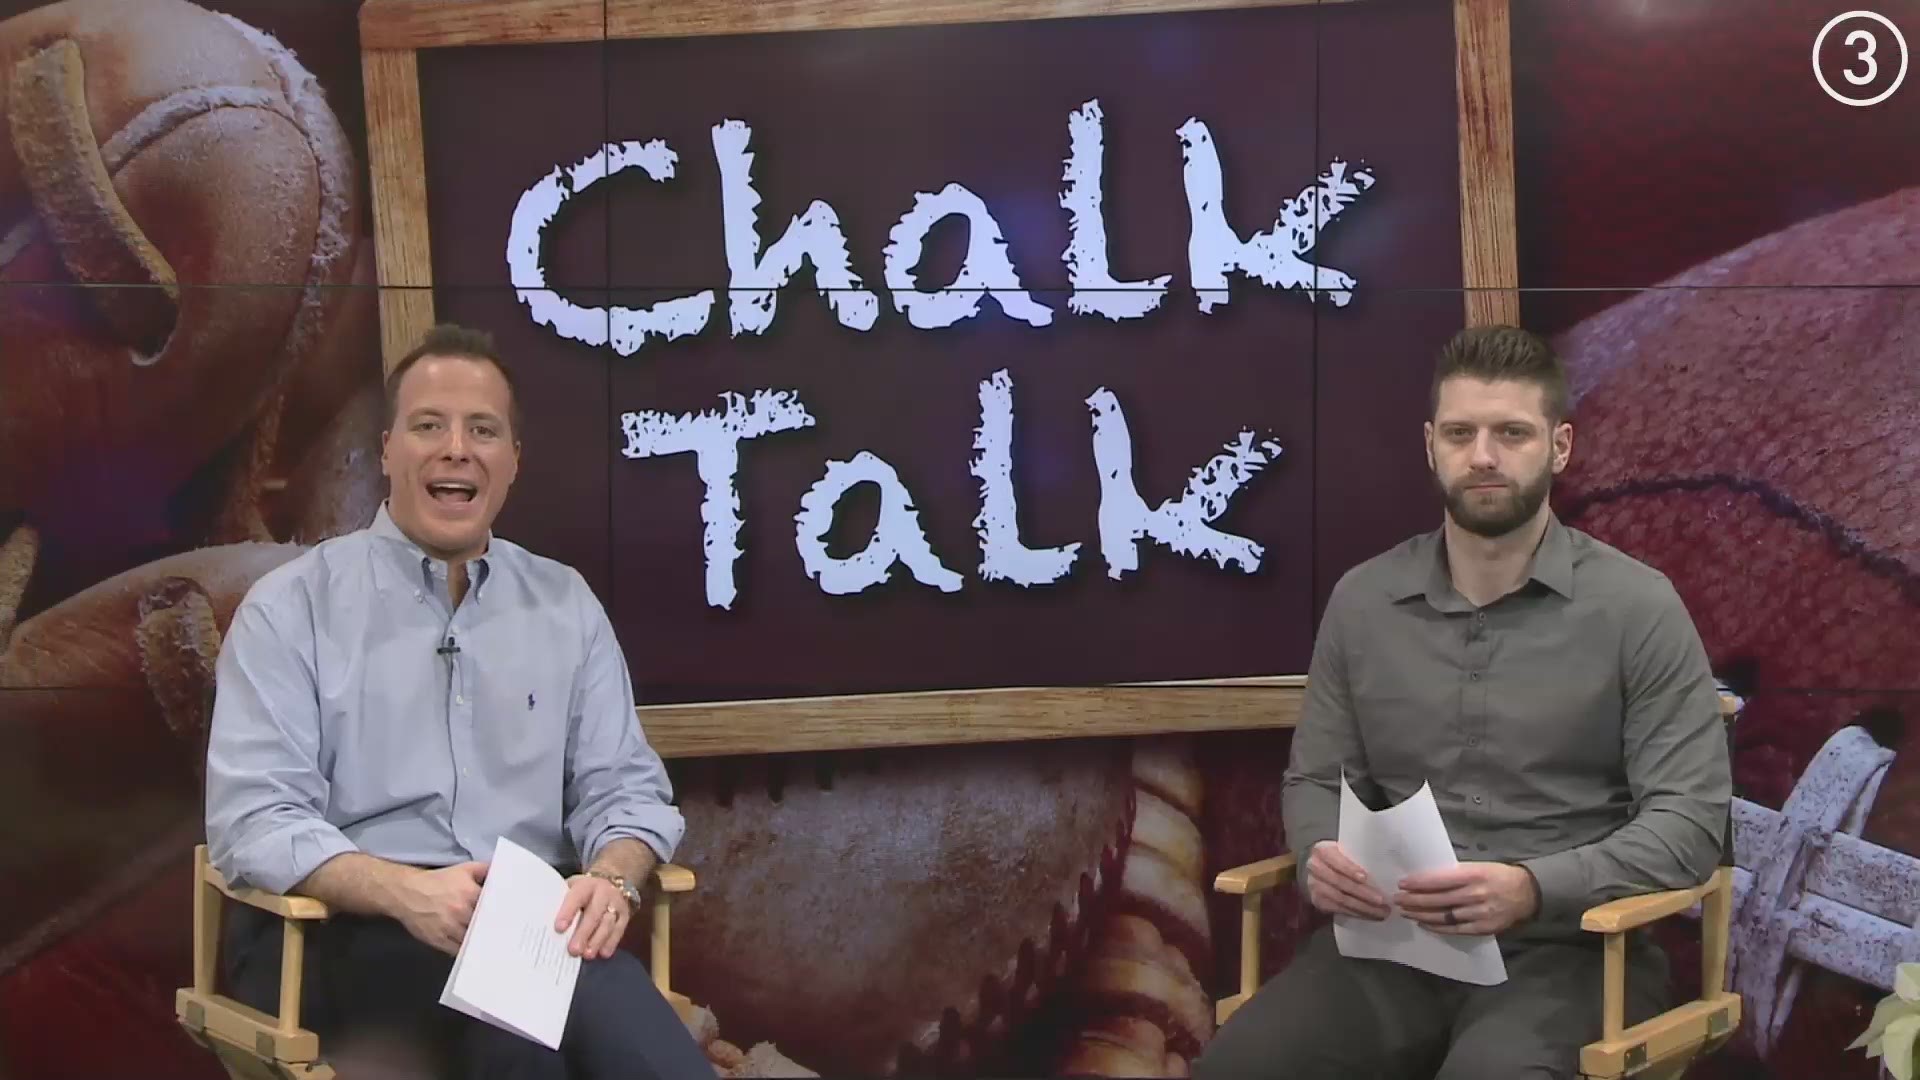 On the 17th episode of WKYC's Chalk Talk, Ben Axelrod and Nick Camino make their picks for the College Football Playoff and Week 17 of the NFL season.